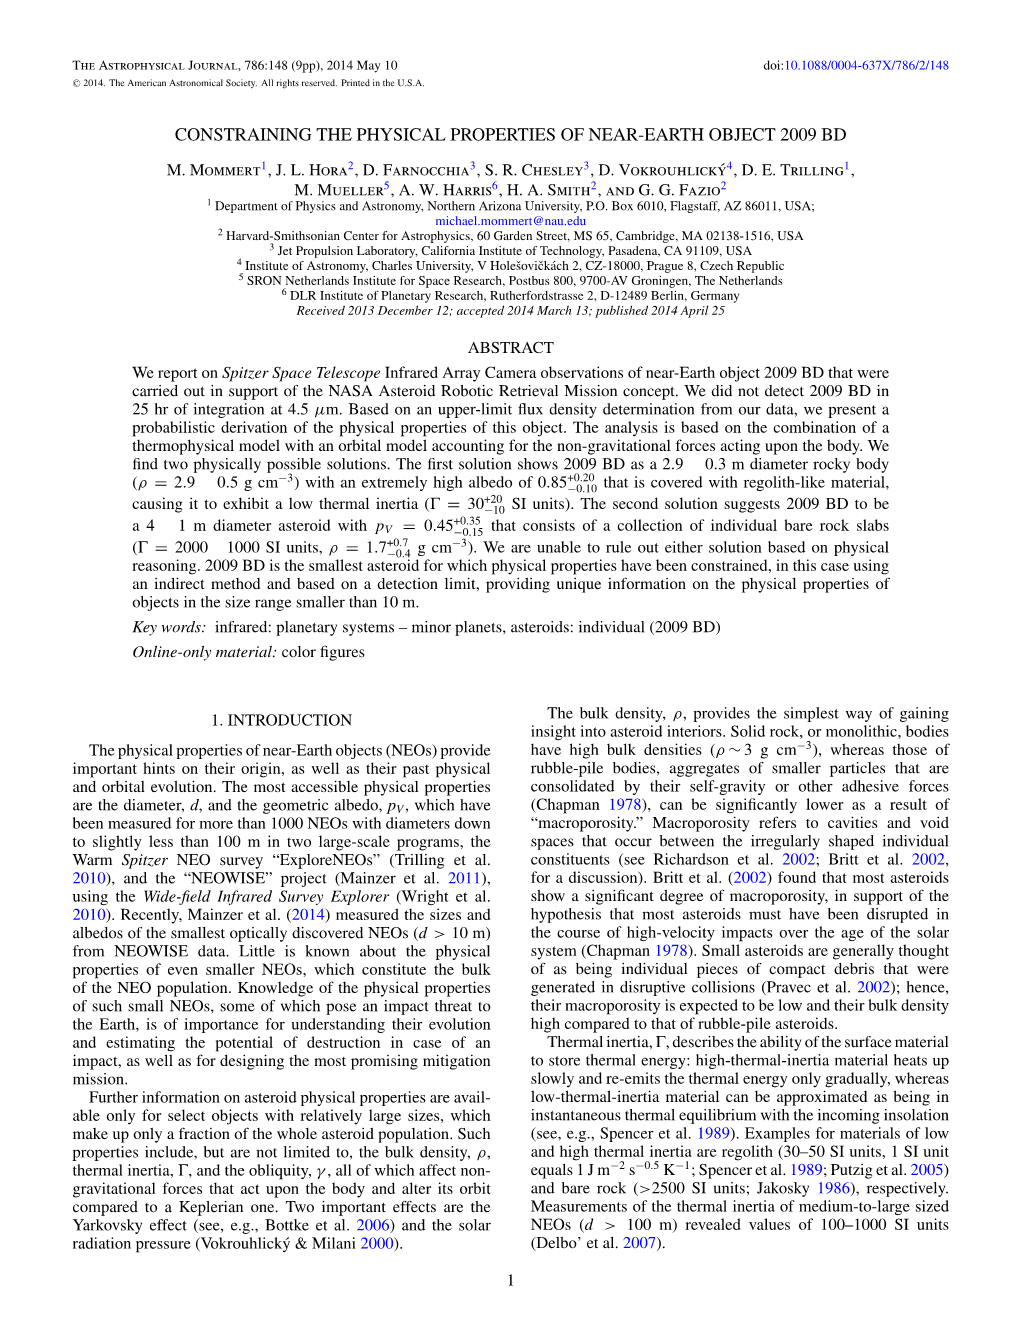 Constraining the Physical Properties of Near-Earth Object 2009 Bd